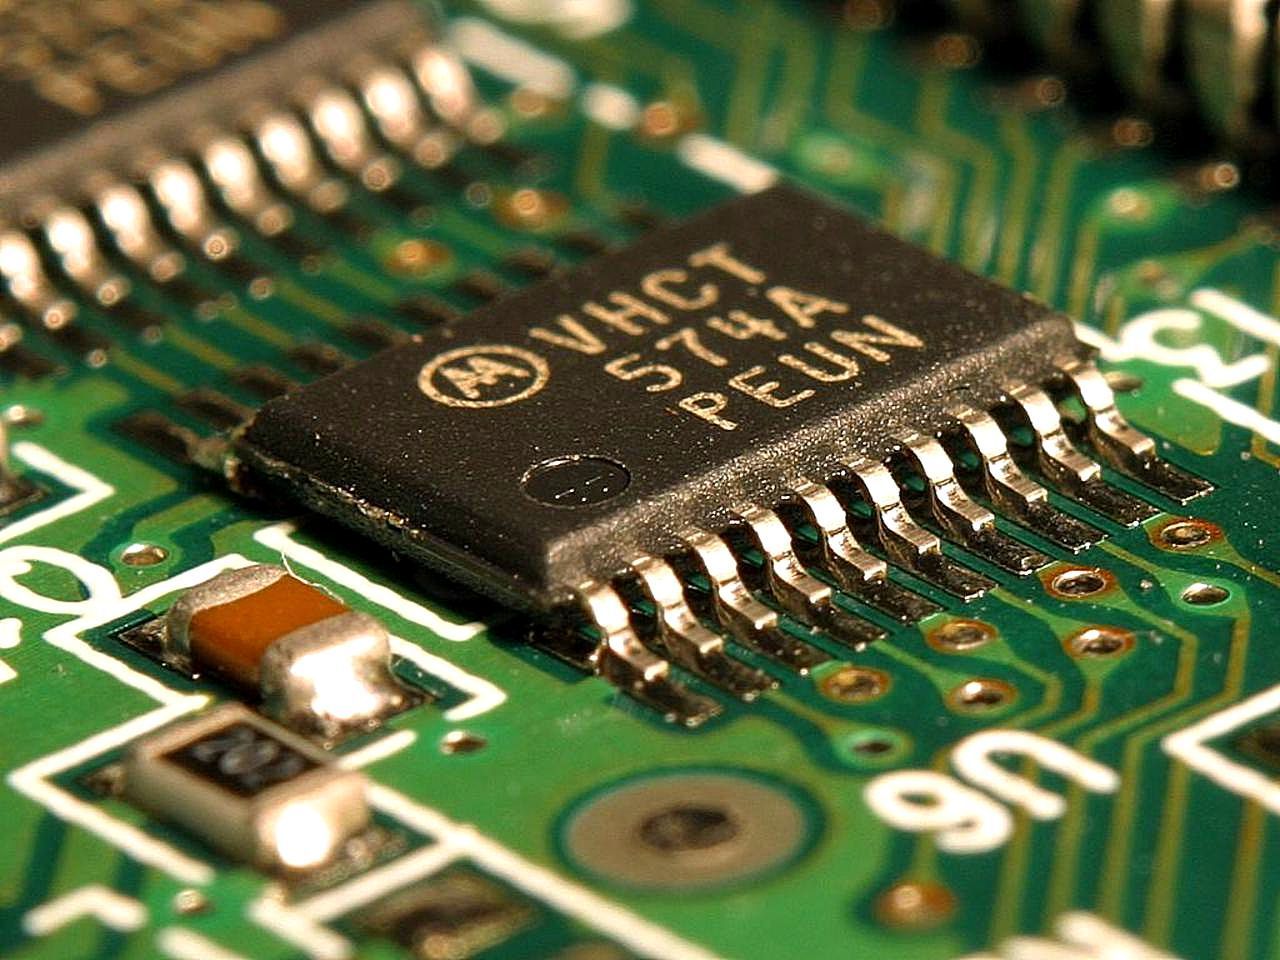 Stock image of an IC and other surface-mount components on a circuit board